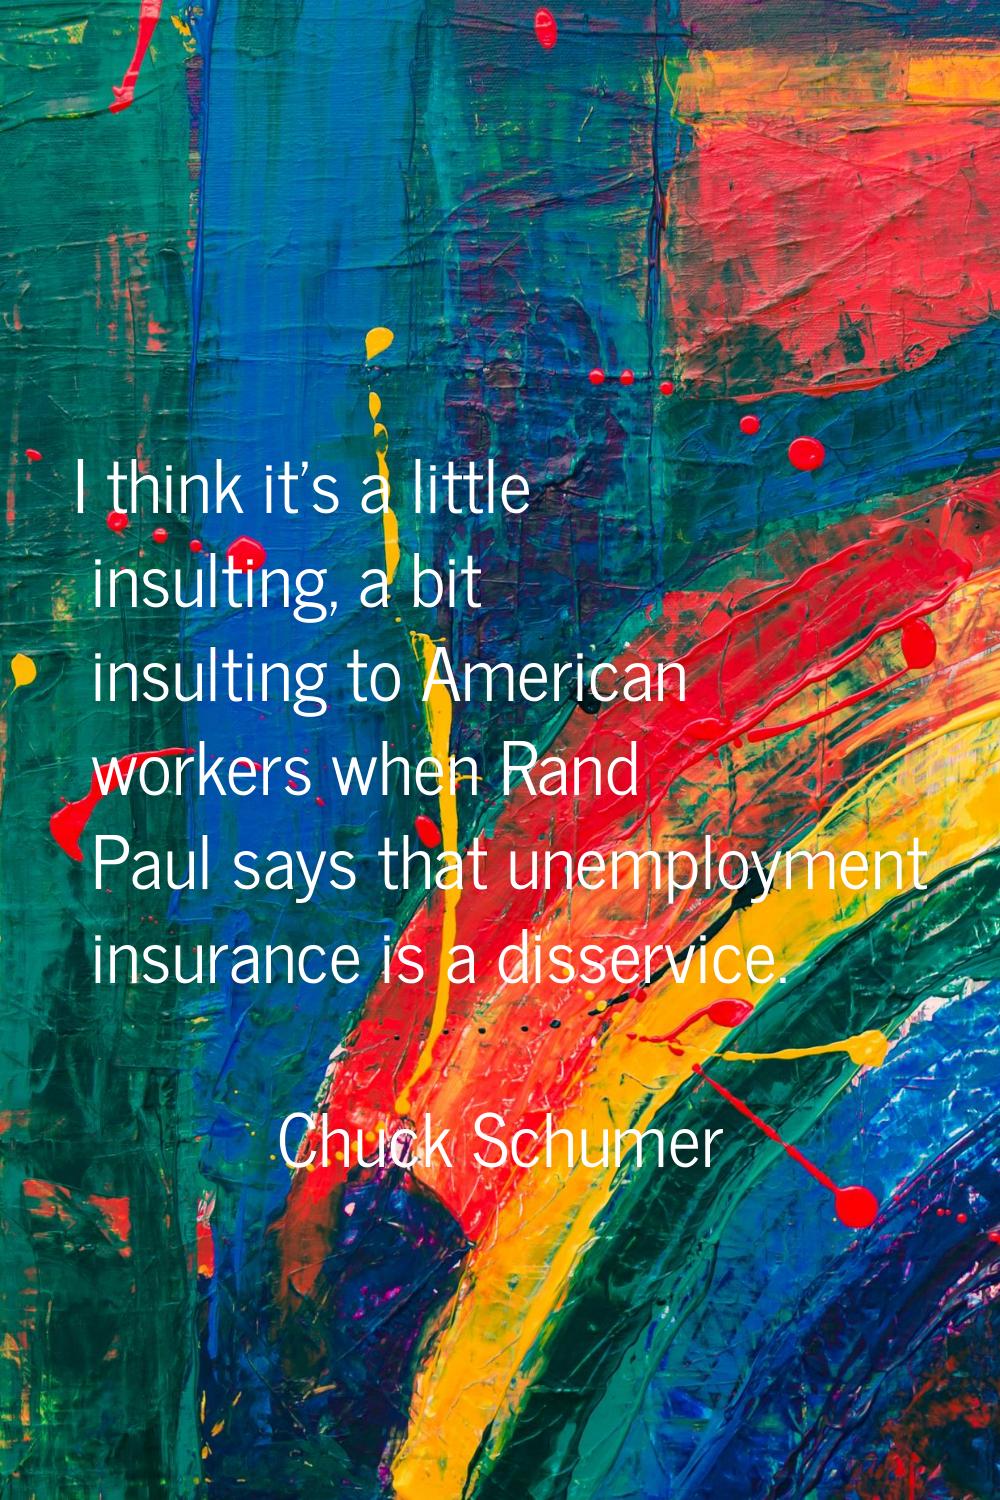 I think it's a little insulting, a bit insulting to American workers when Rand Paul says that unemp